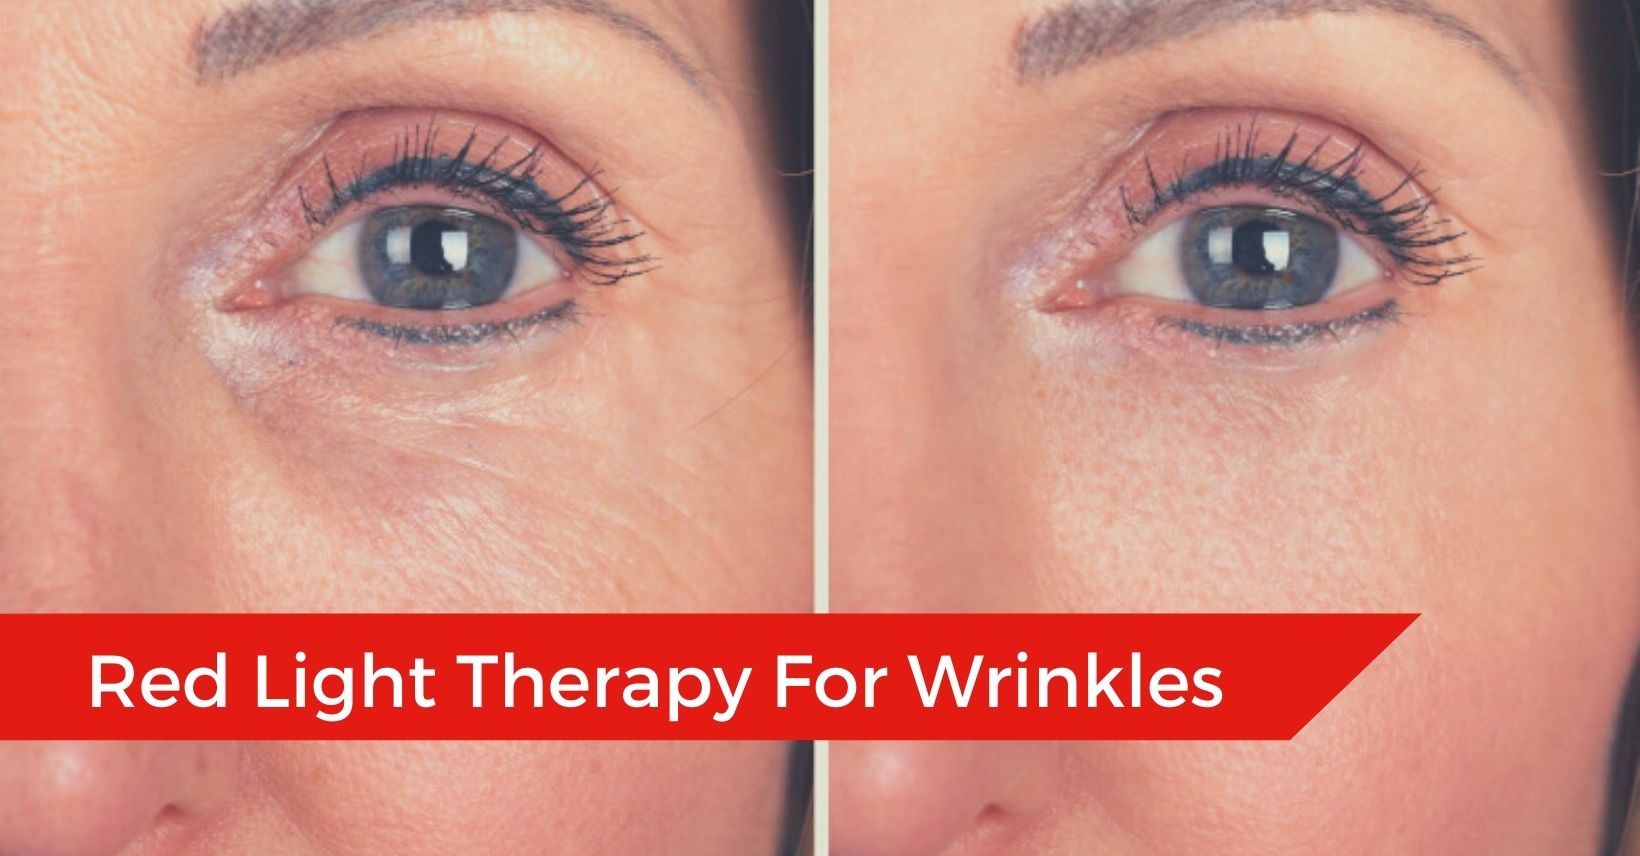 sikring Addition Erobrer Red Light Therapy For Wrinkles: The Best Way To Reverse Skin Aging? |  Therapeutic Beams